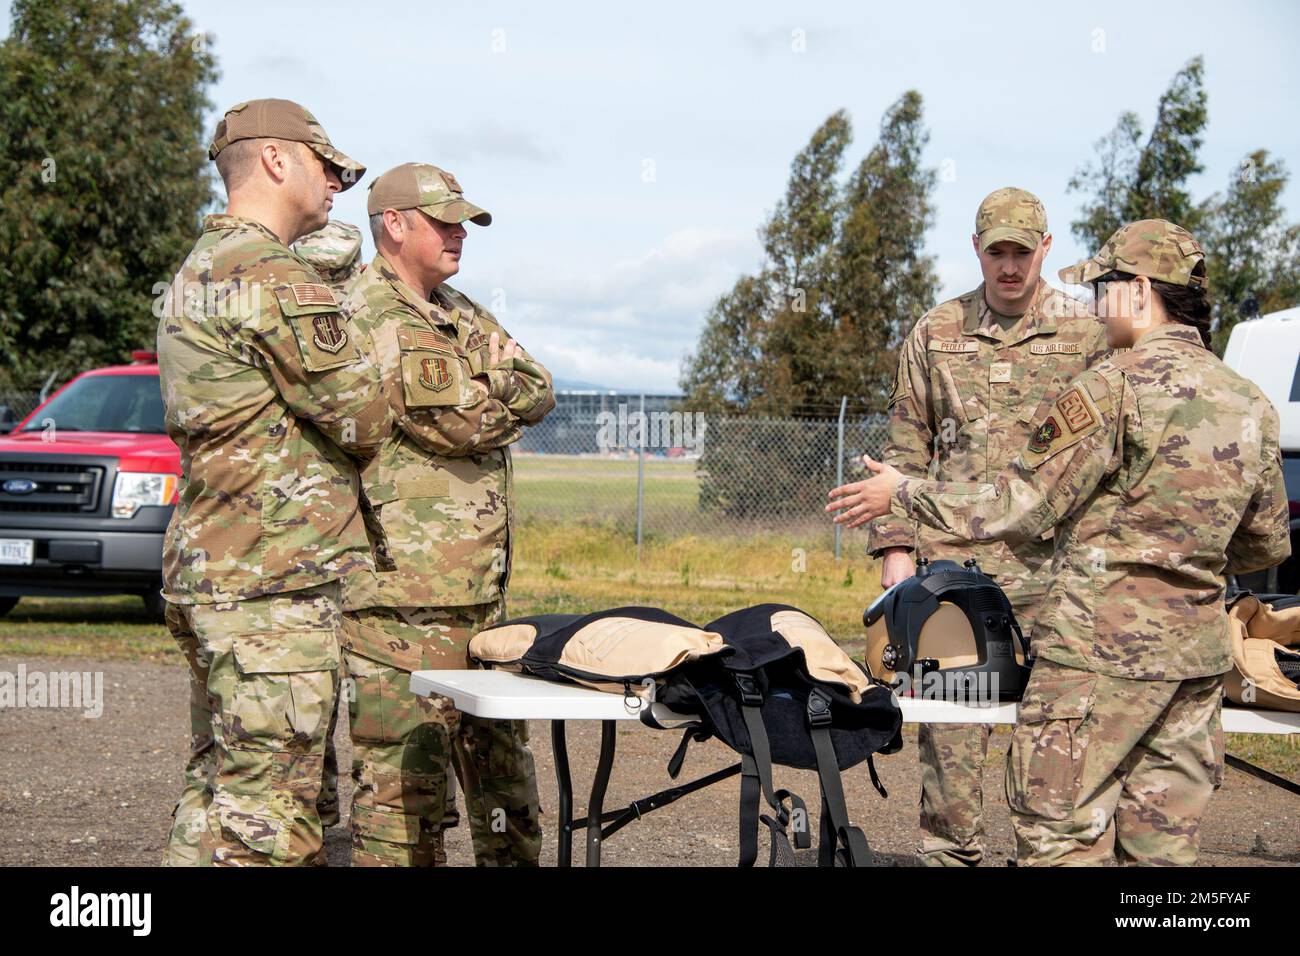 From left to right, U.S. Air Force Chief Master Sgt. Keith Scott, 60th Air Mobility Wing command chief, Col. Corey Simmons, 60th AMW commander, listen to Senior Airman Steven Pedley and SrA Serena Pedley, both 60th Civil Engineer Squadron Explosive Ordnance Disposal journeymen, during a visit to the EOD range at Travis Air Force Base, California, March 15, 2022. Trained to detect, disarm and dispose of explosive threats in extreme environments, EOD technicians serve as the Air Force’s bomb squad. Stock Photo